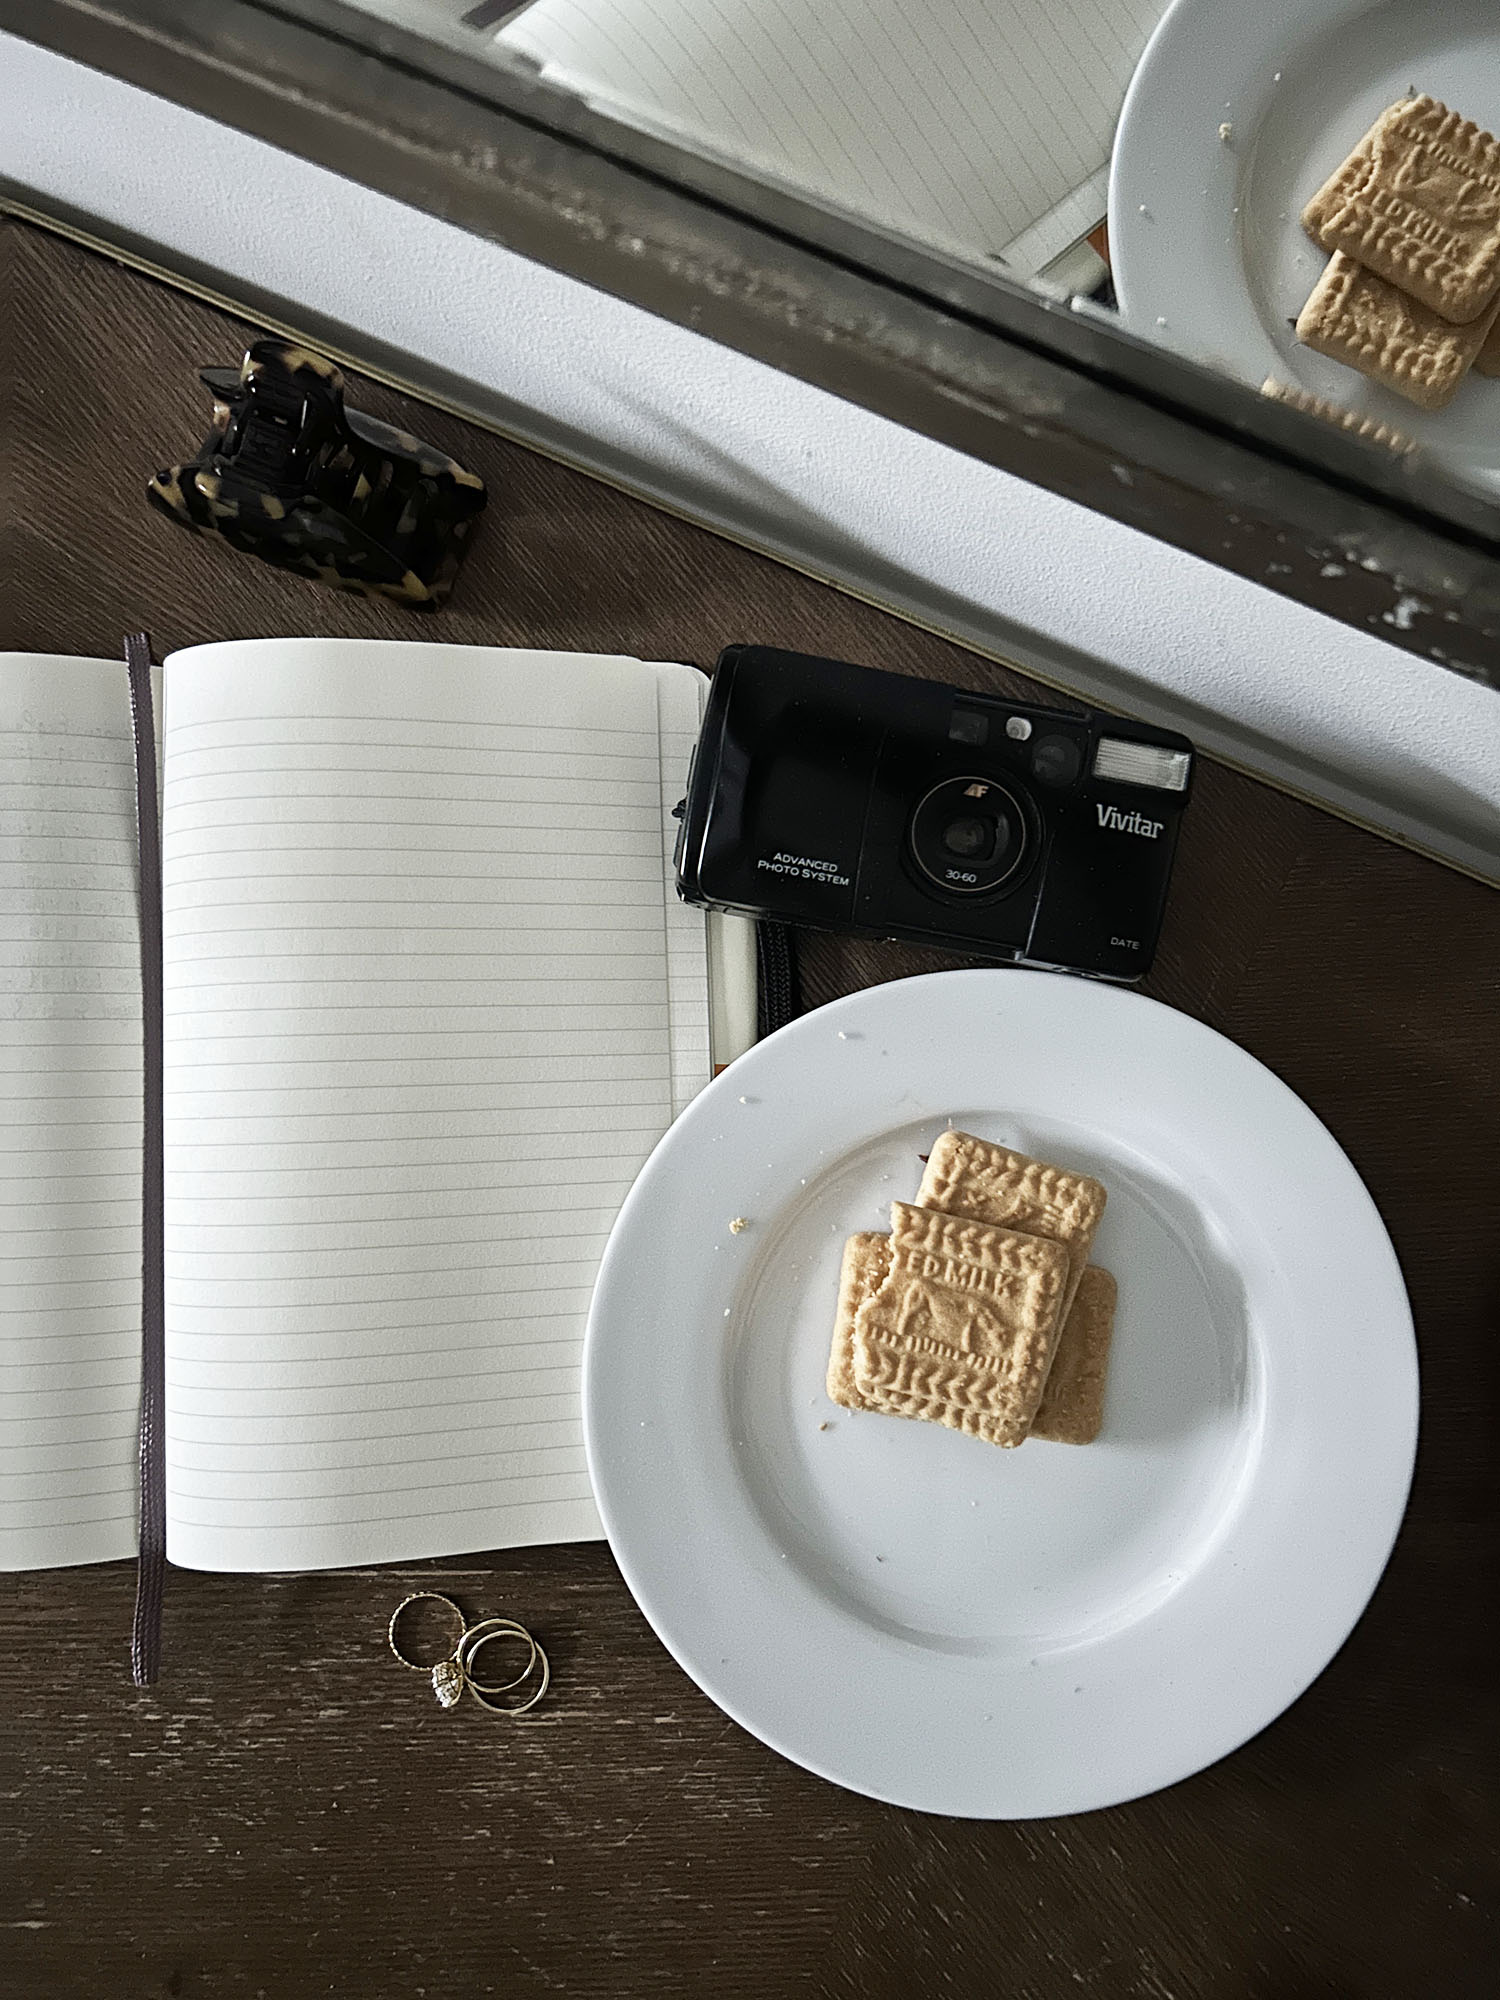 Coco & Voltaire - Moleskine notebook, plate of butter biscuits, vintage camera, rings and hair clip on a wooden table